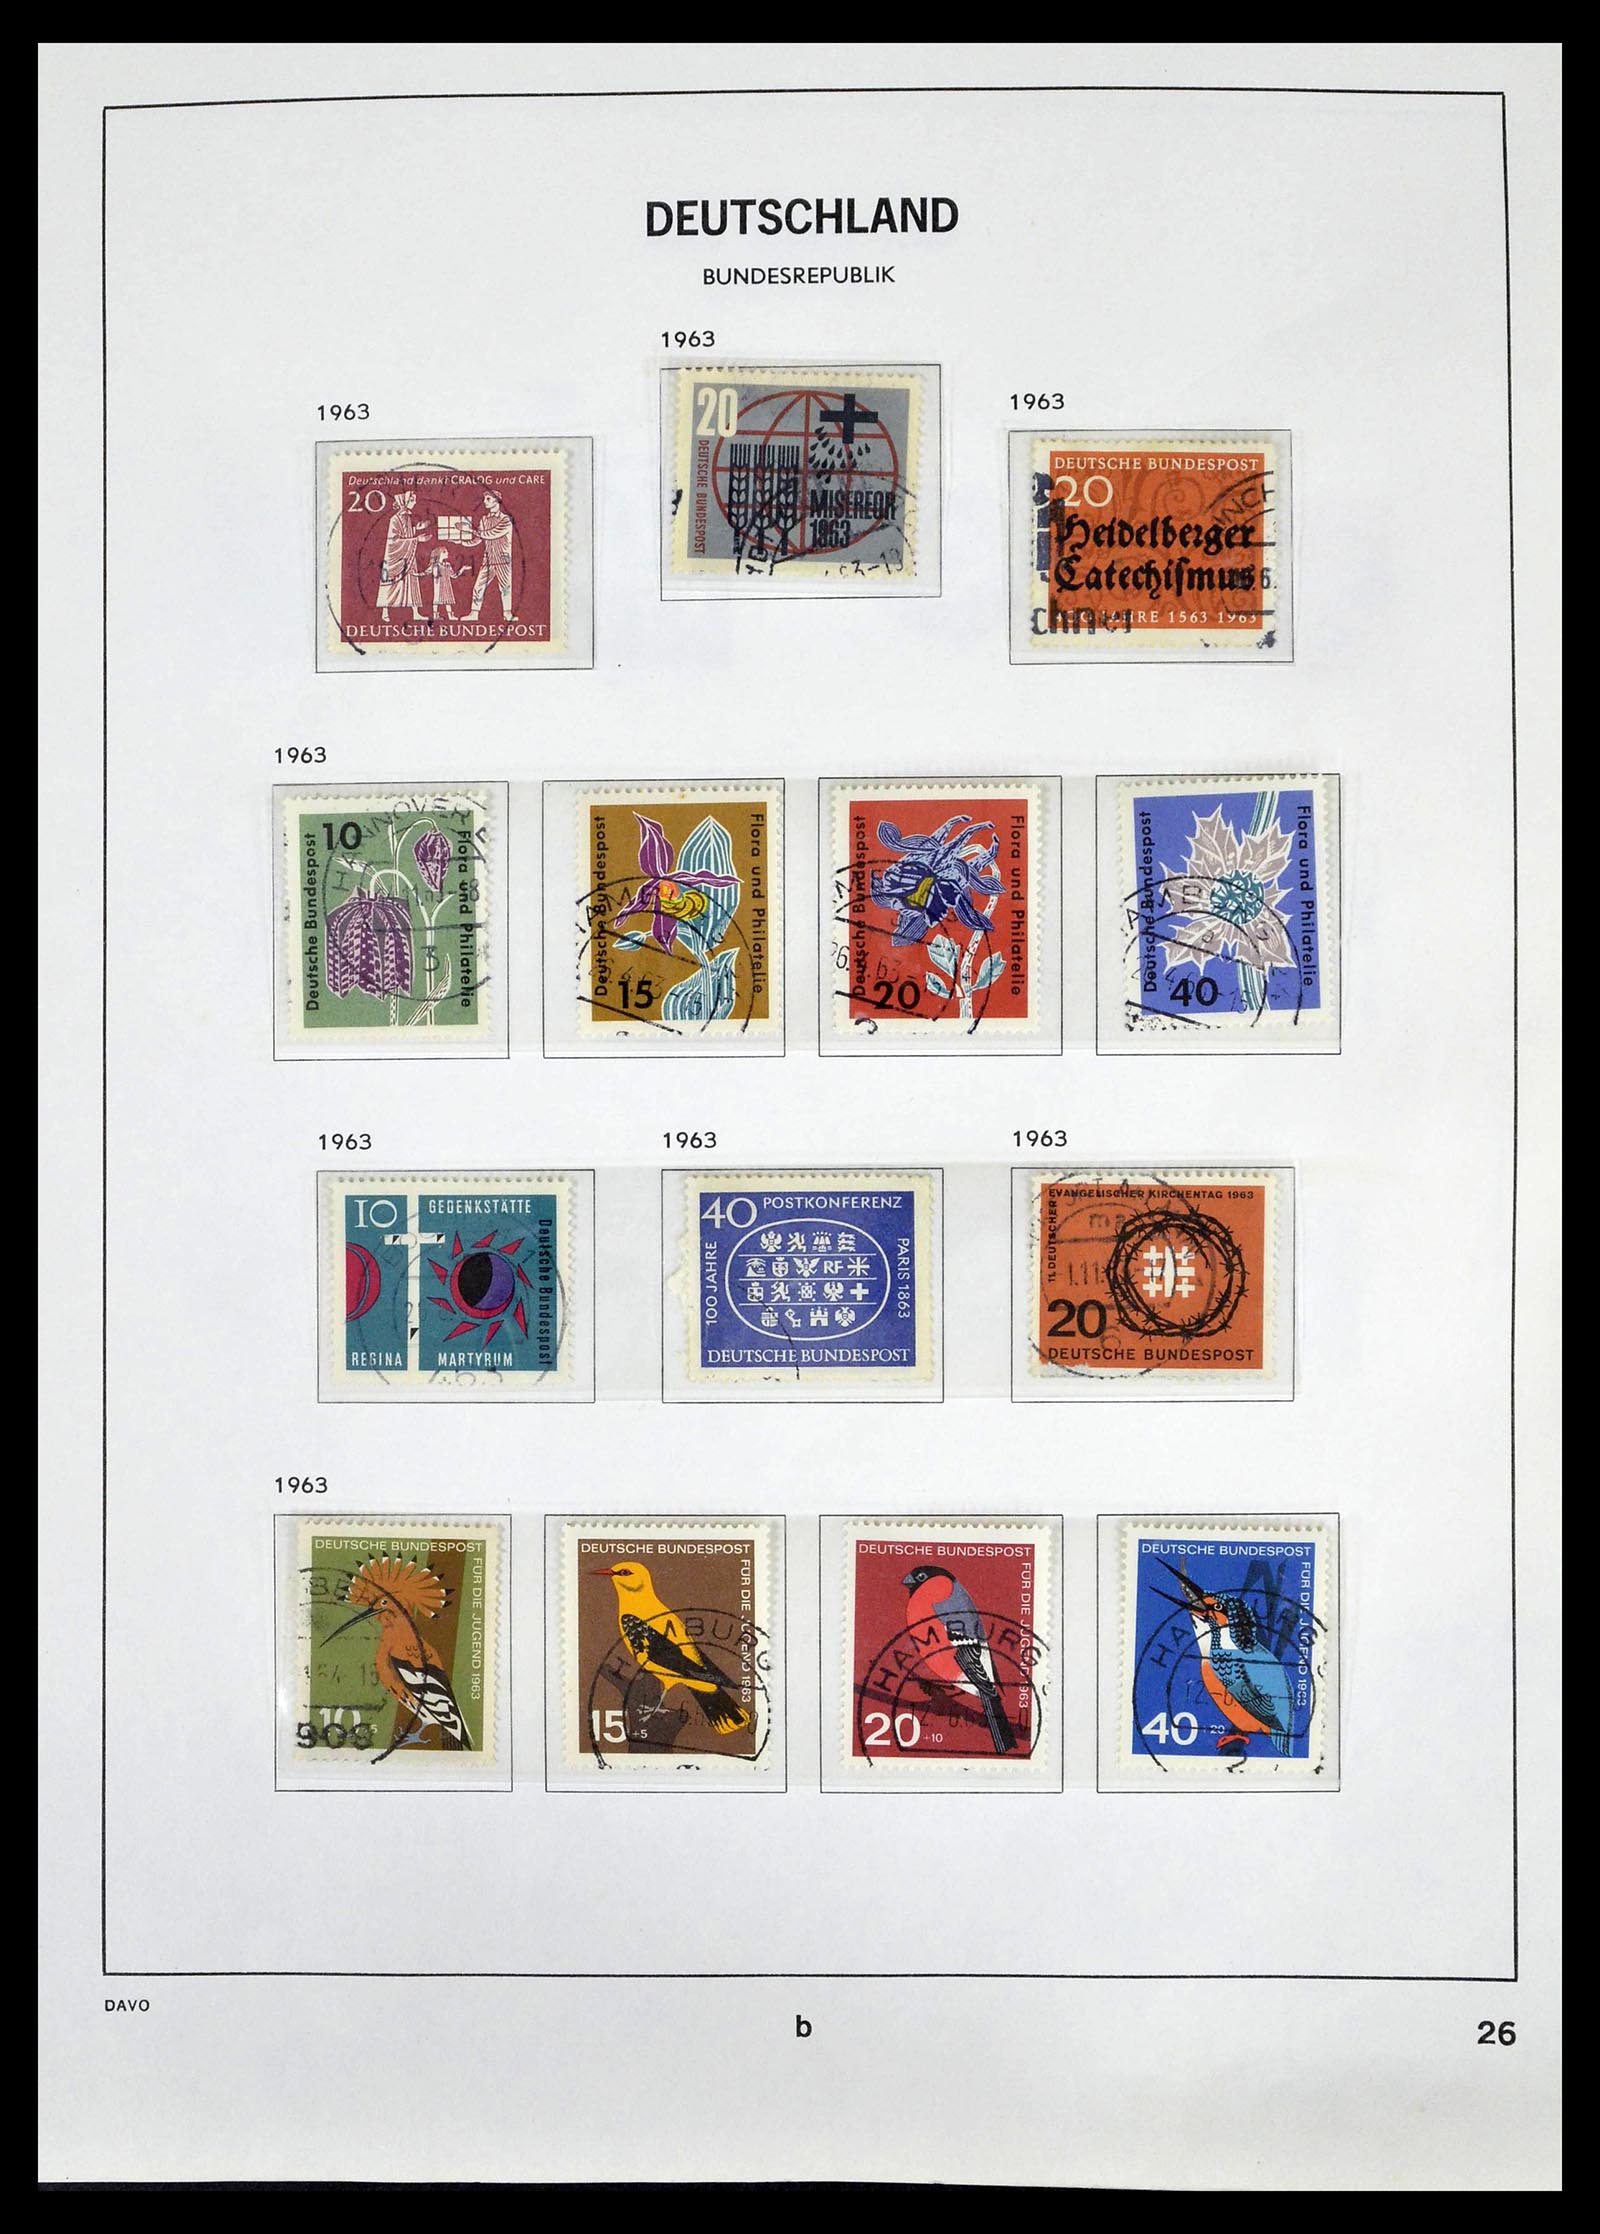 39326 0021 - Stamp collection 39326 Bundespost 1949-2003.